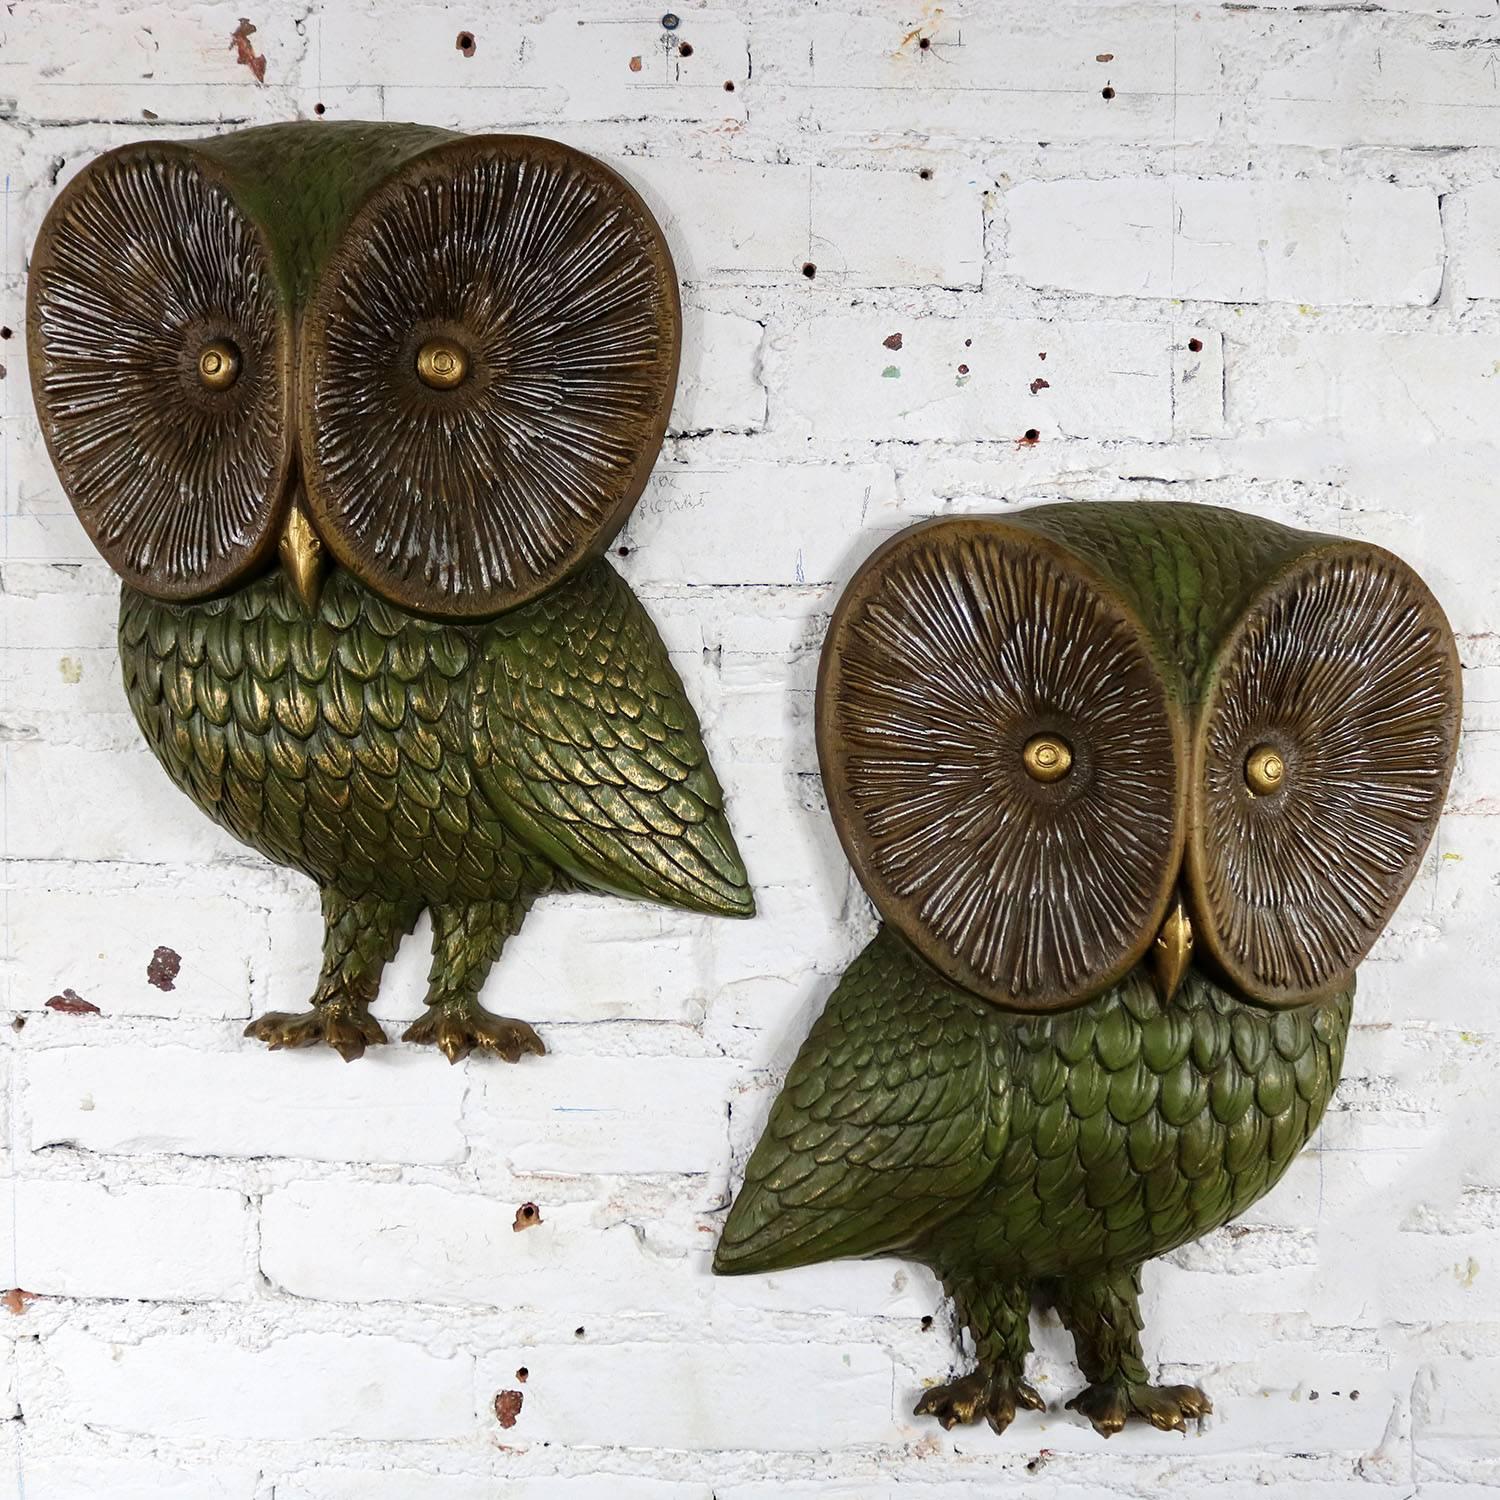 Handsome Mid-Century Modern owl wall sculptures or plaques by the Burwood Product Co. We believe this great pair to be circa 1967. They are in excellent condition.

This pair of owls are a…….Hoot! I couldn’t resist. These over-scaled fellows make